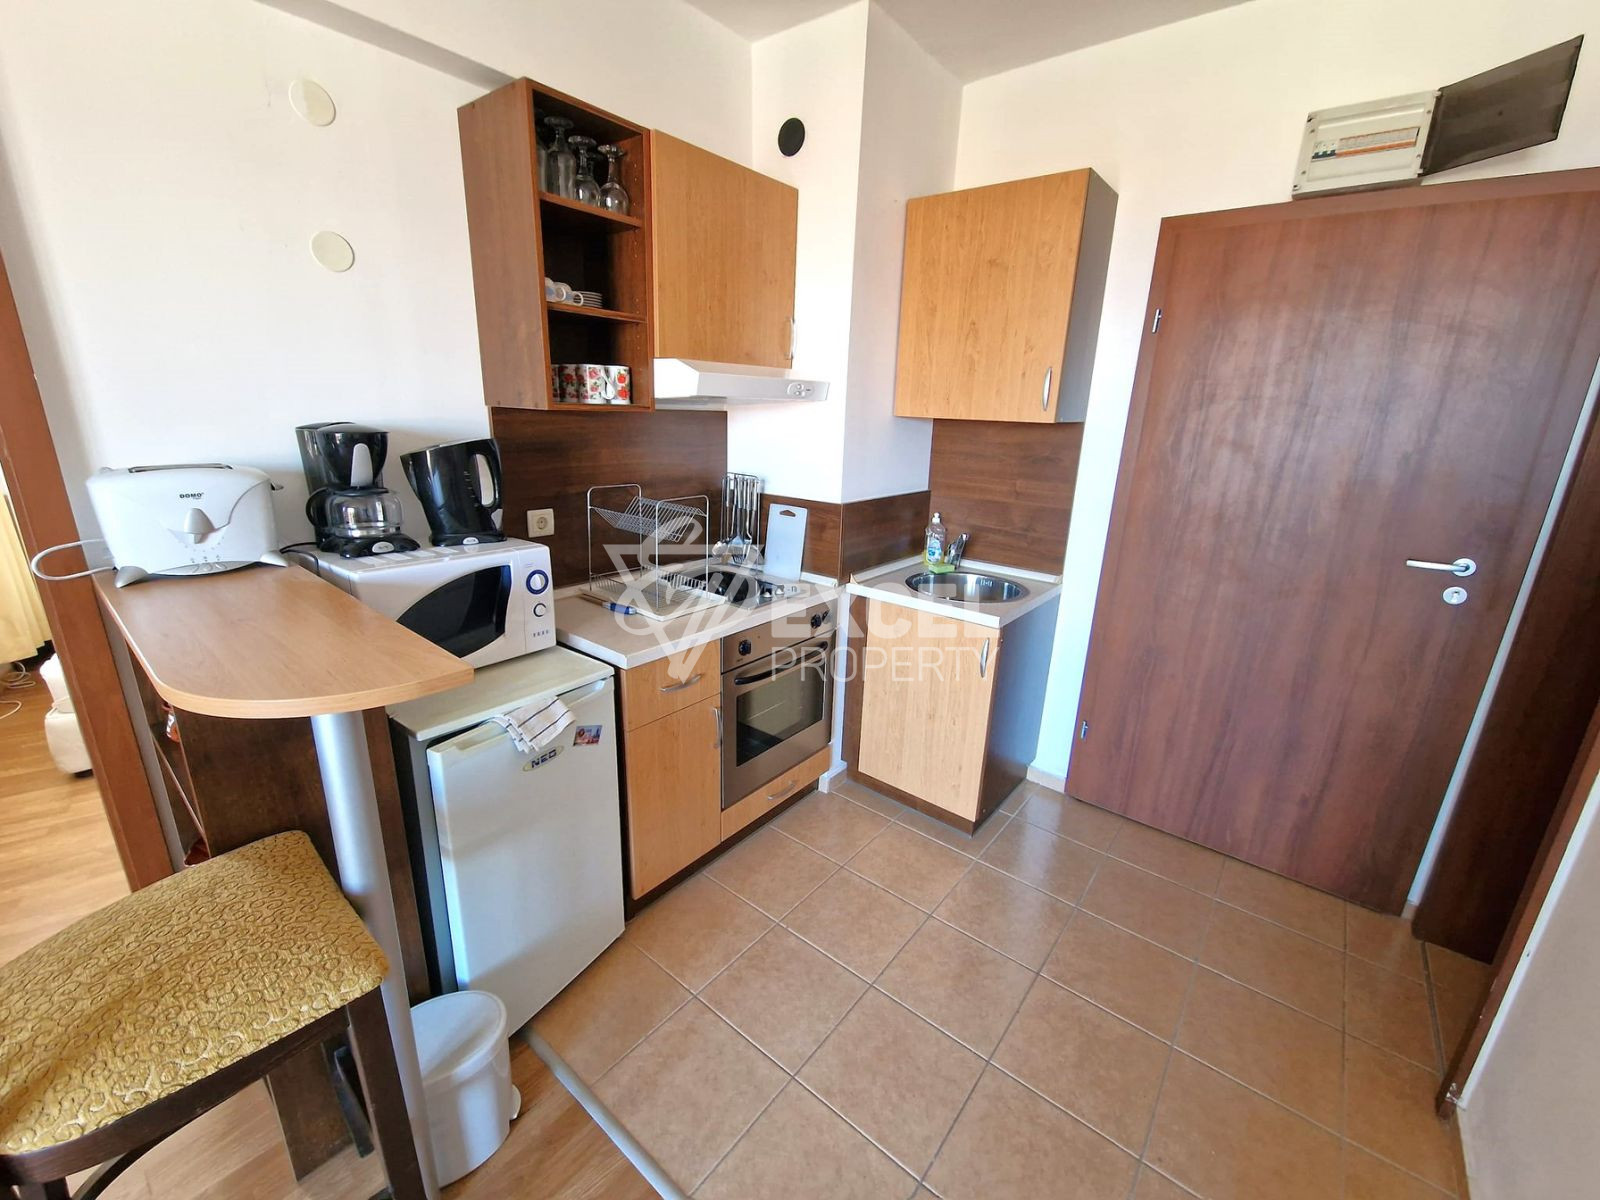 One-bedroom apartment 300m from the Gondola with a low maintenance fee!